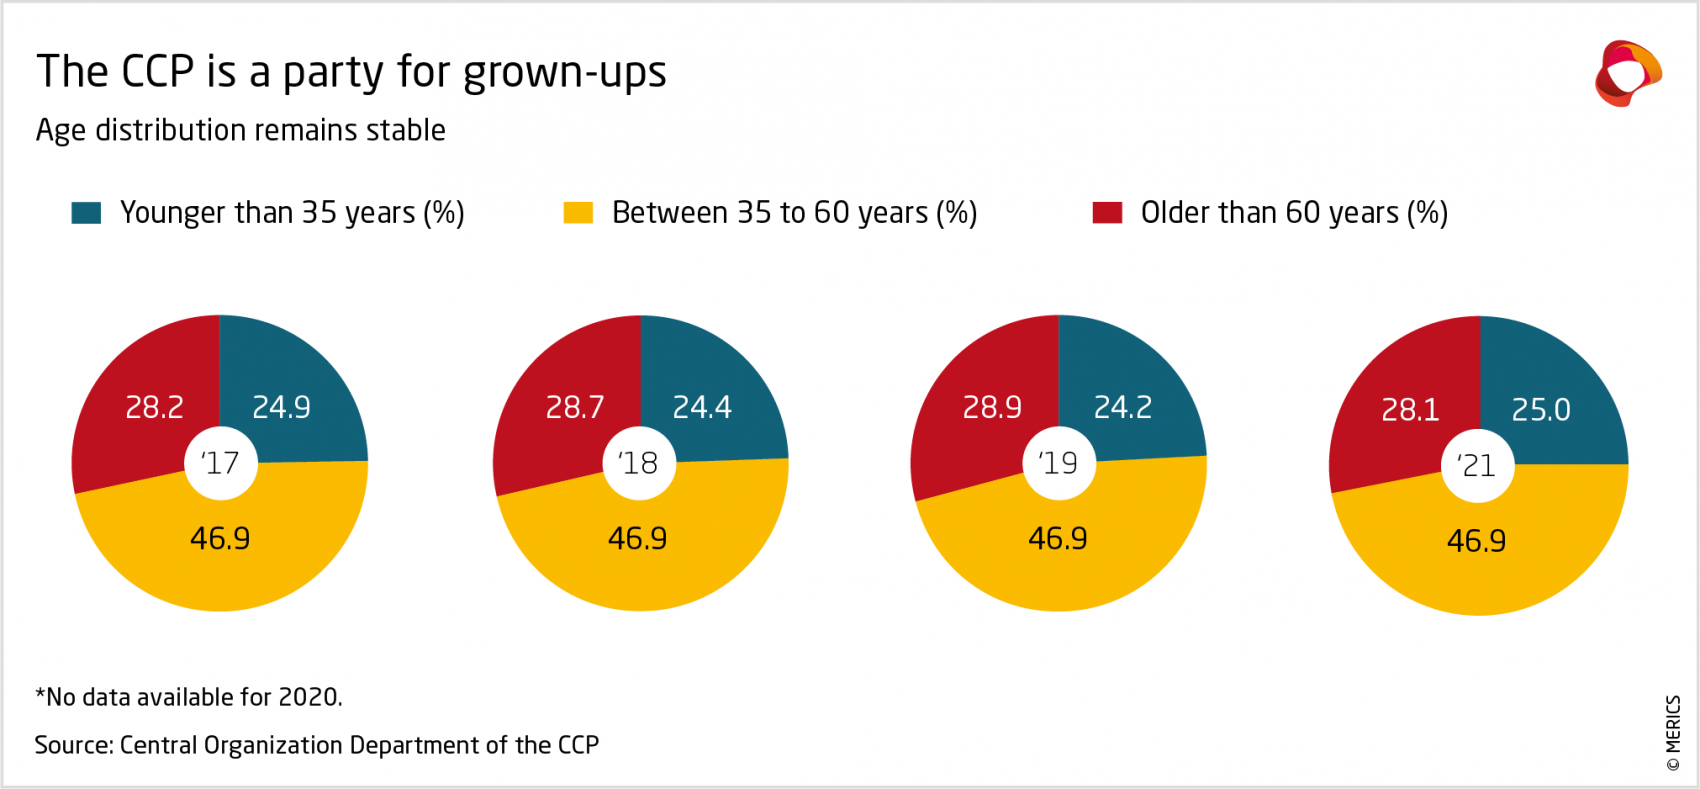 Age distribution remains stable